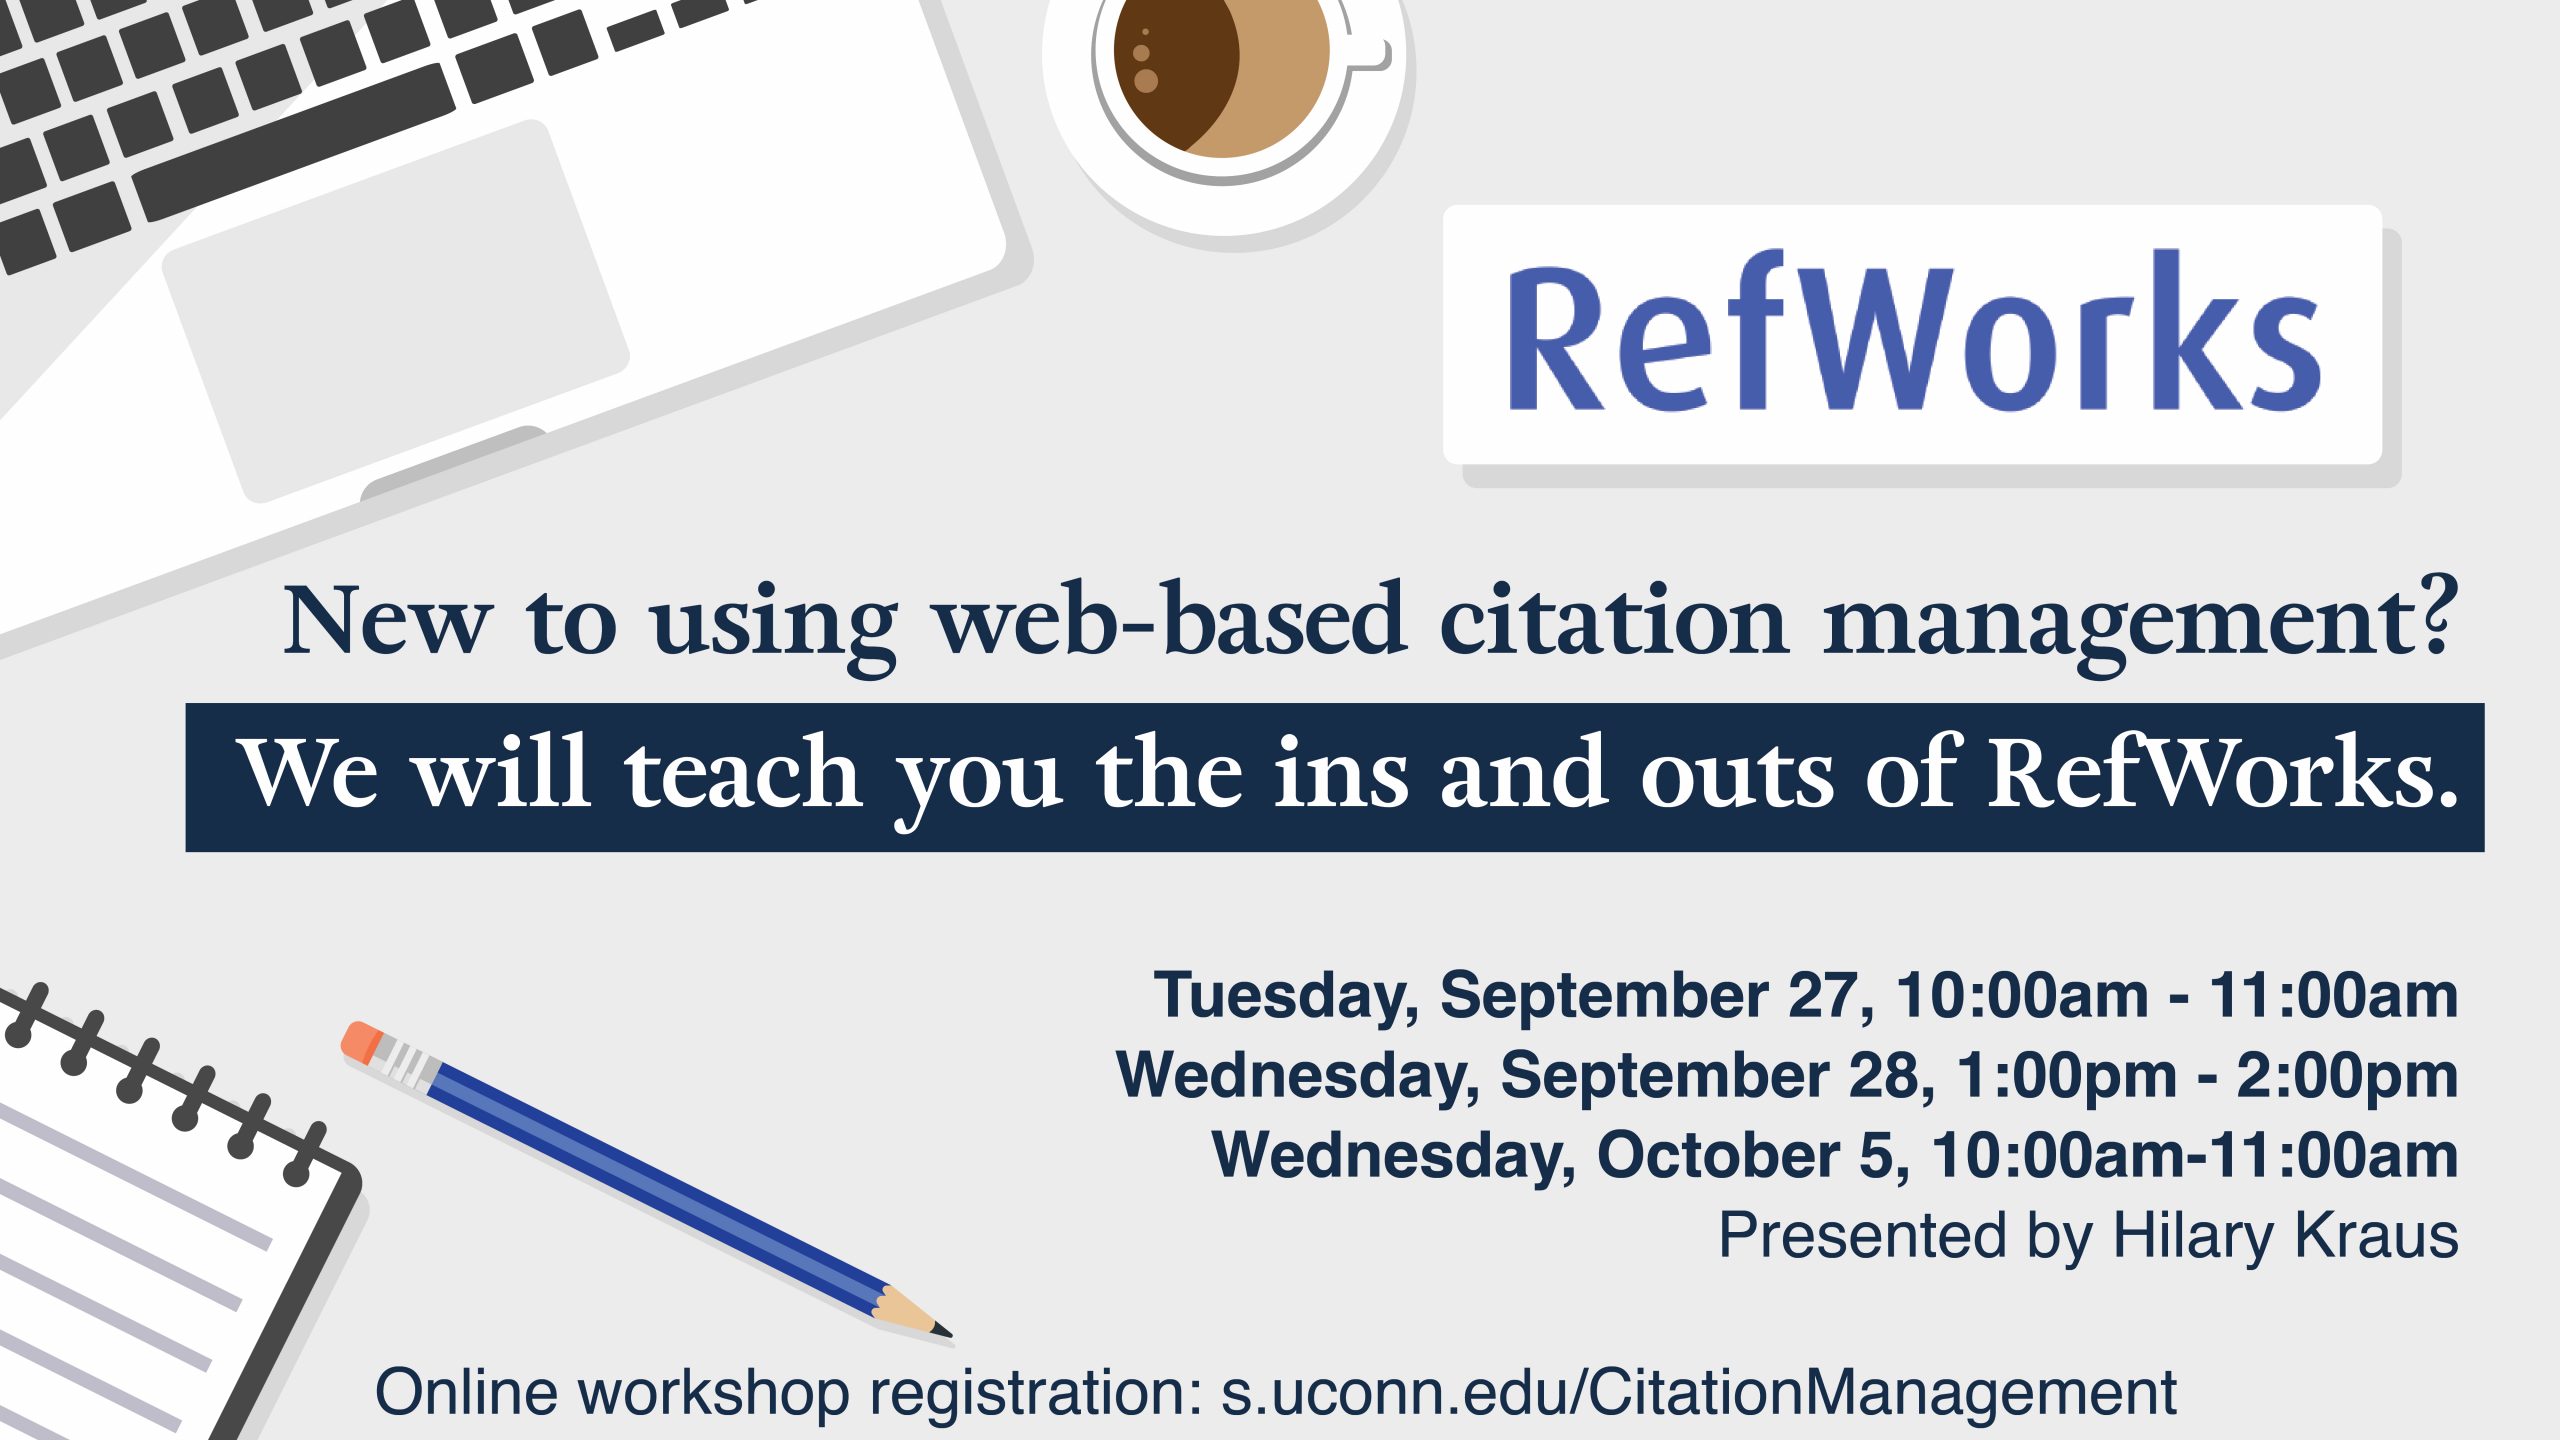 Marketing screen with illustrations of a cup of coffee, a laptop, and school supplies and the text, “Refworks. New to using web-based citation management? We will teach you the ins and outs of RefWorks. Tuesday, September 27, 10:00am - 11:00am, Wednesday, September 28, 1:00pm - 2:00pm, Wednesday, October 5, 10:00am-11:00am. Presented by Hilary Kraus. Online workshop registration: s.uconn.edu/CitationManagement.”